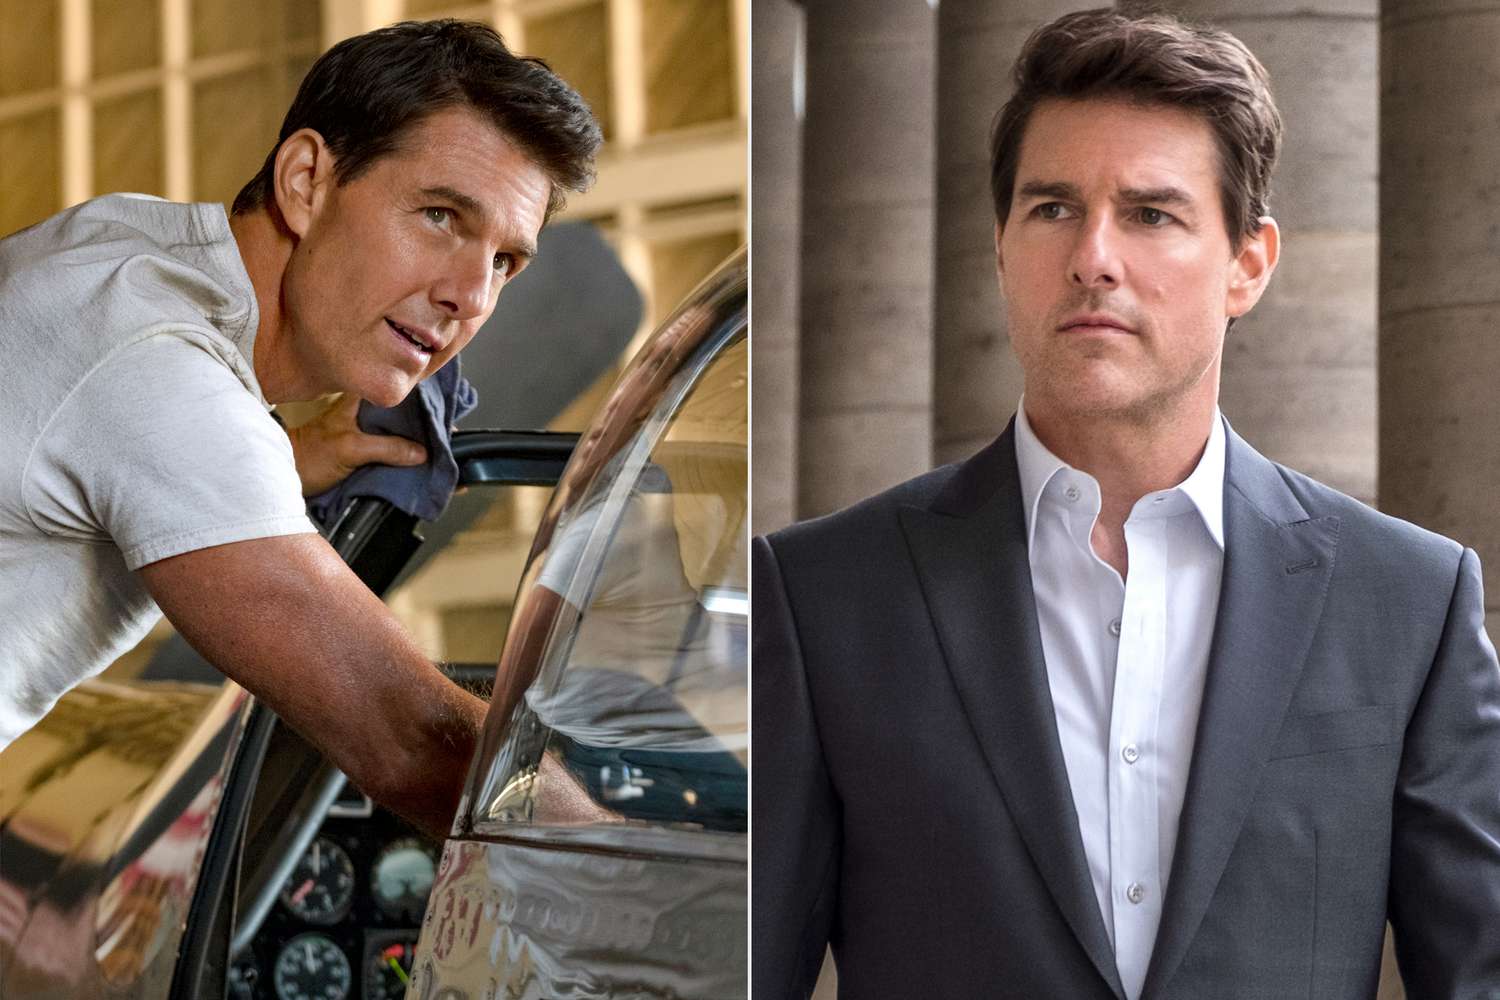 Will Tom Cruise ever release his new 'Top Gun' and 'Mission: Impossible' movies? An EW investigation